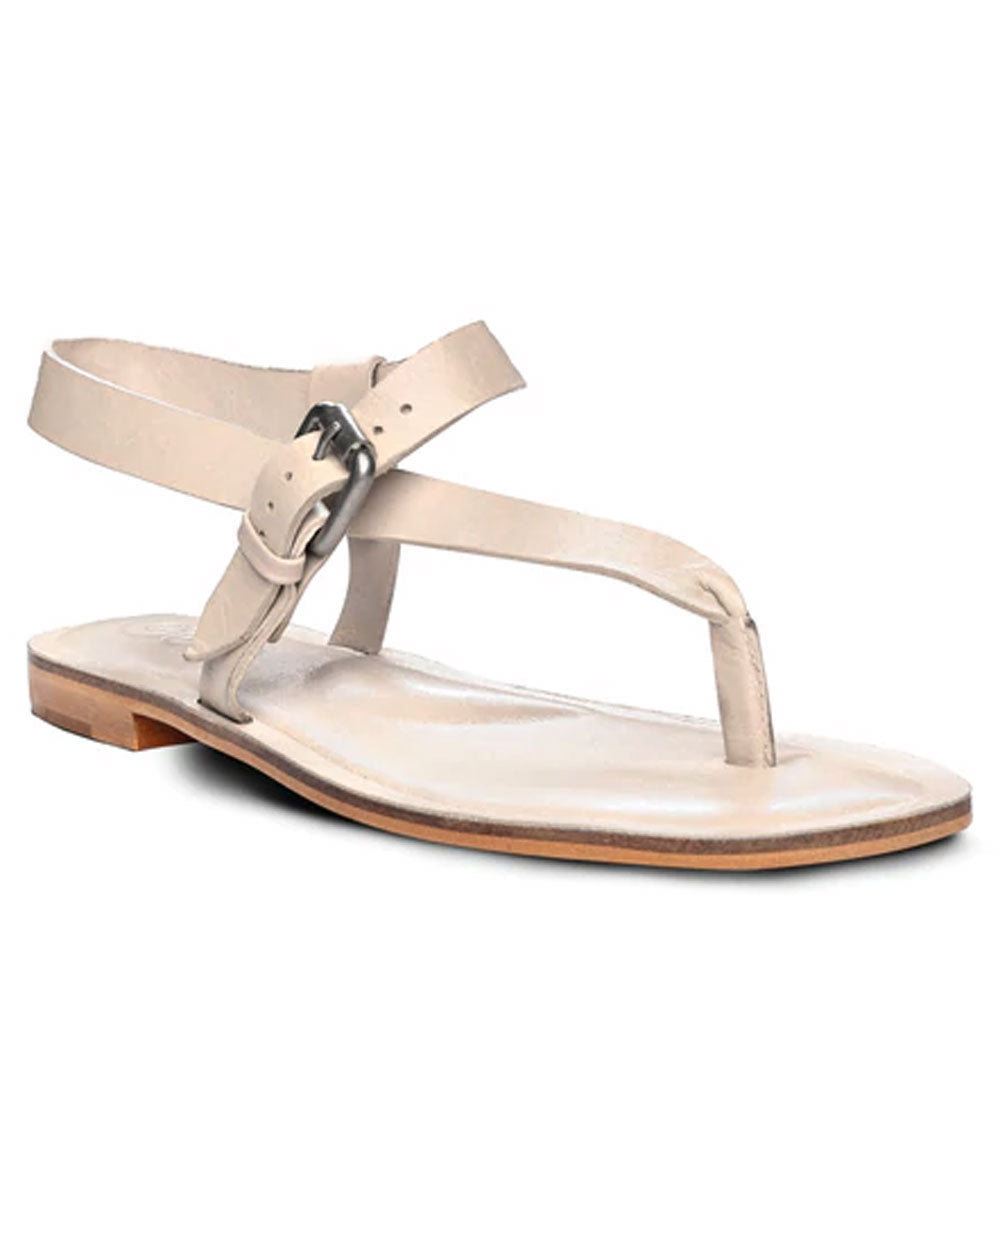 Roma Leather Thong Sandal in Gnocchi Taupe